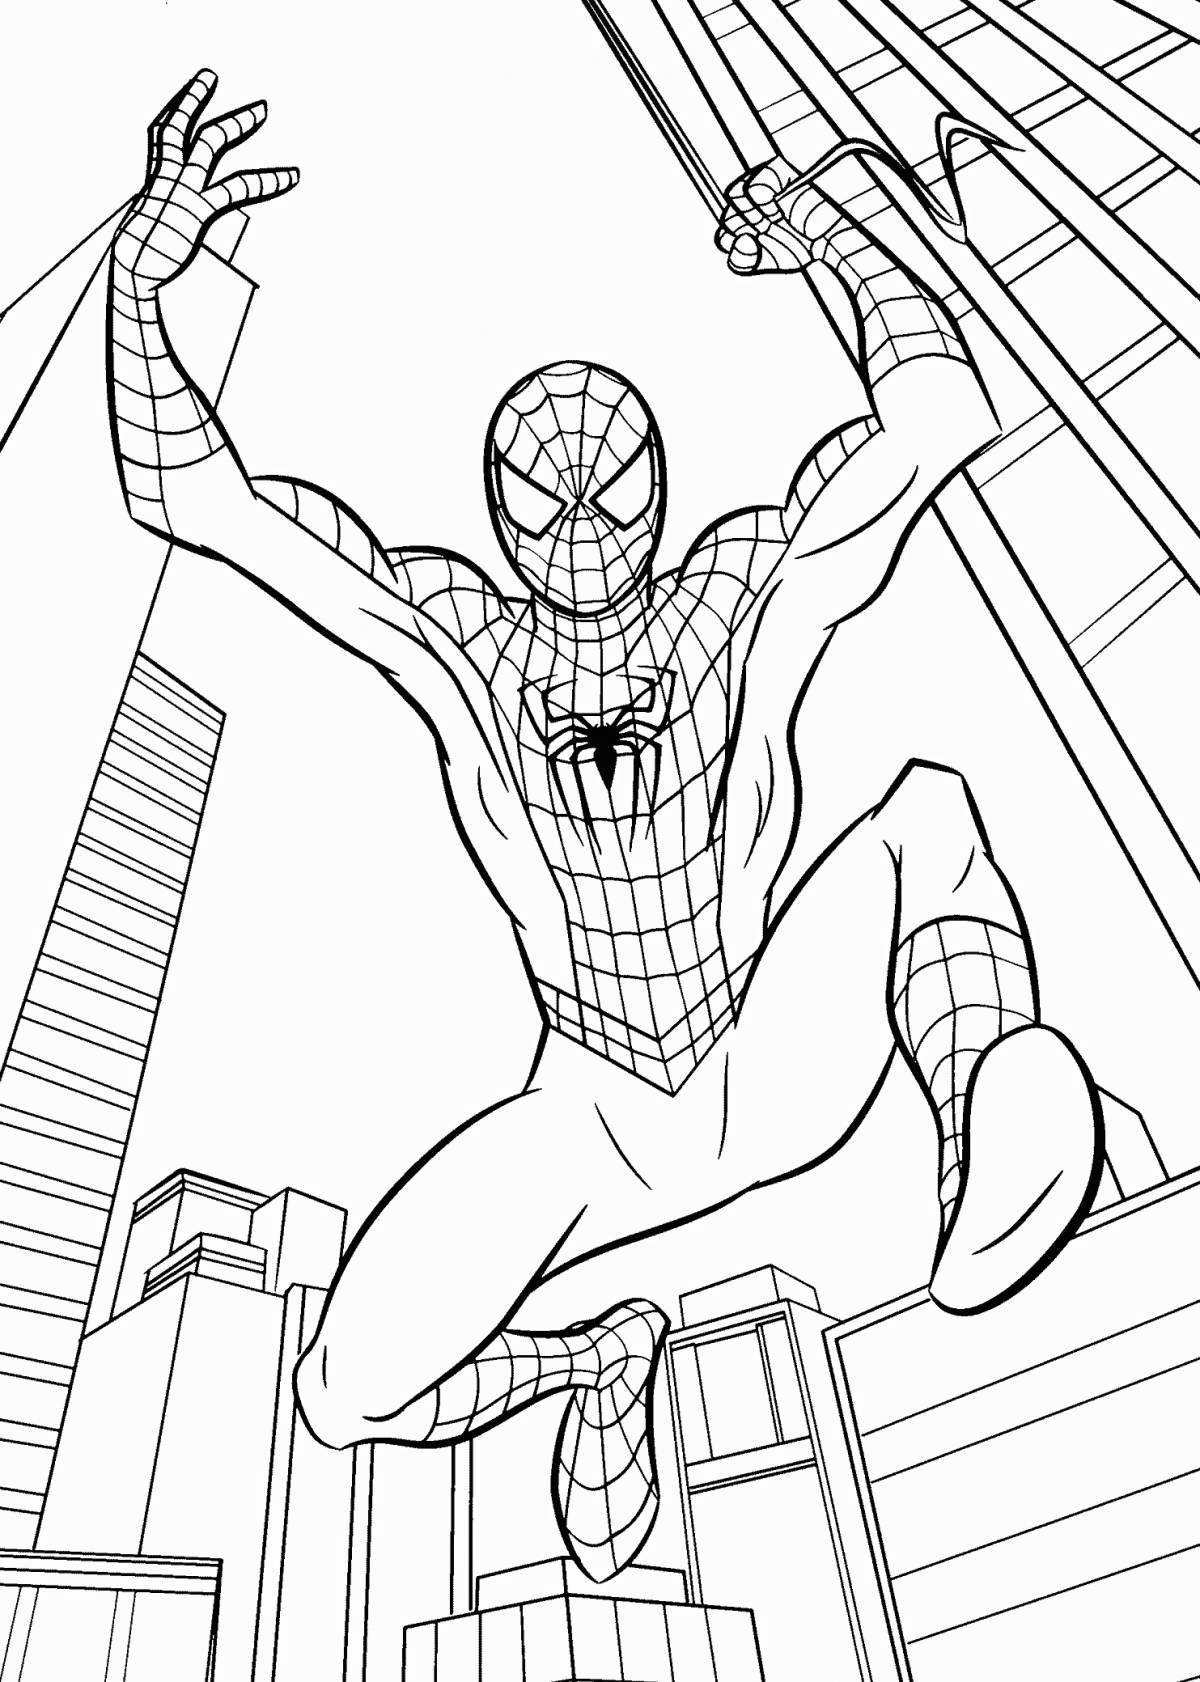 Spiderman ps4 majestic coloring book